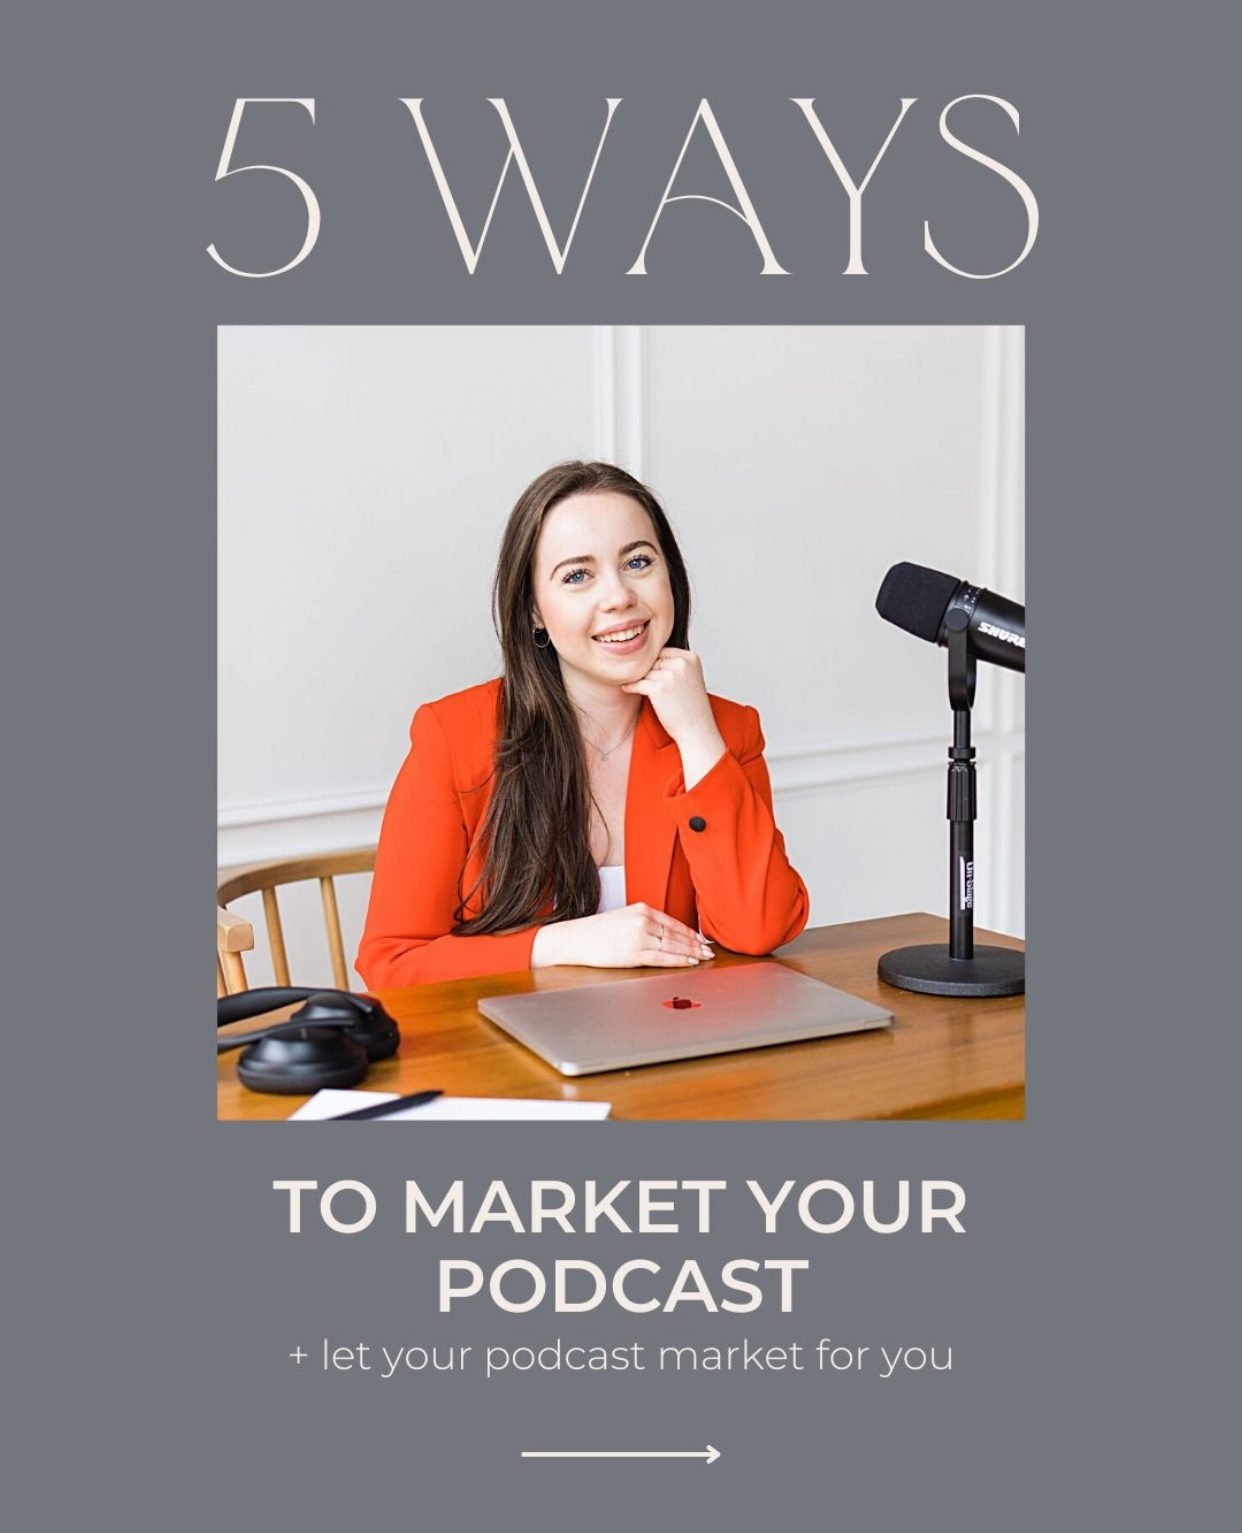 5 Ways to Market Your Podcast